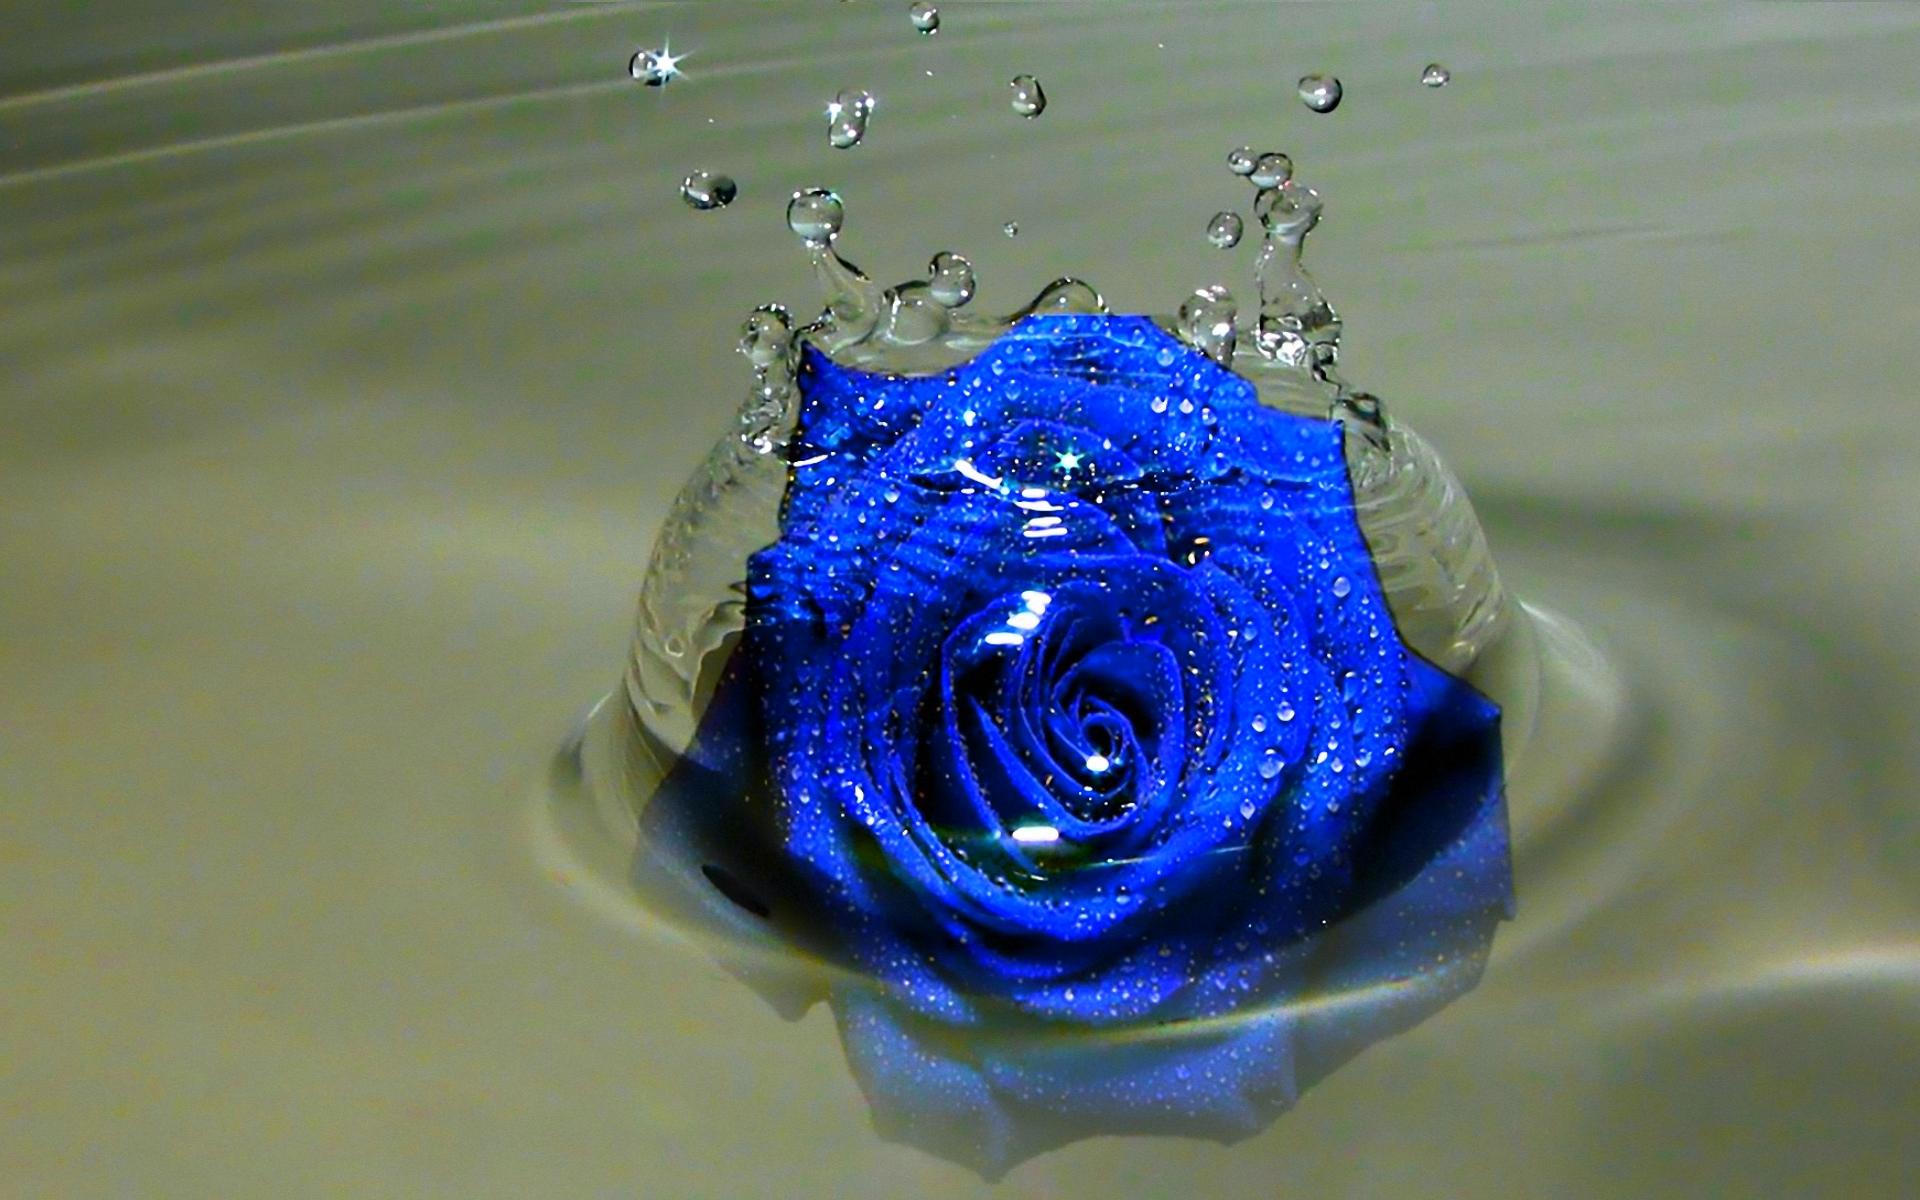 Blue Rose IPhone Wallpaper HD  IPhone Wallpapers  iPhone Wallpapers